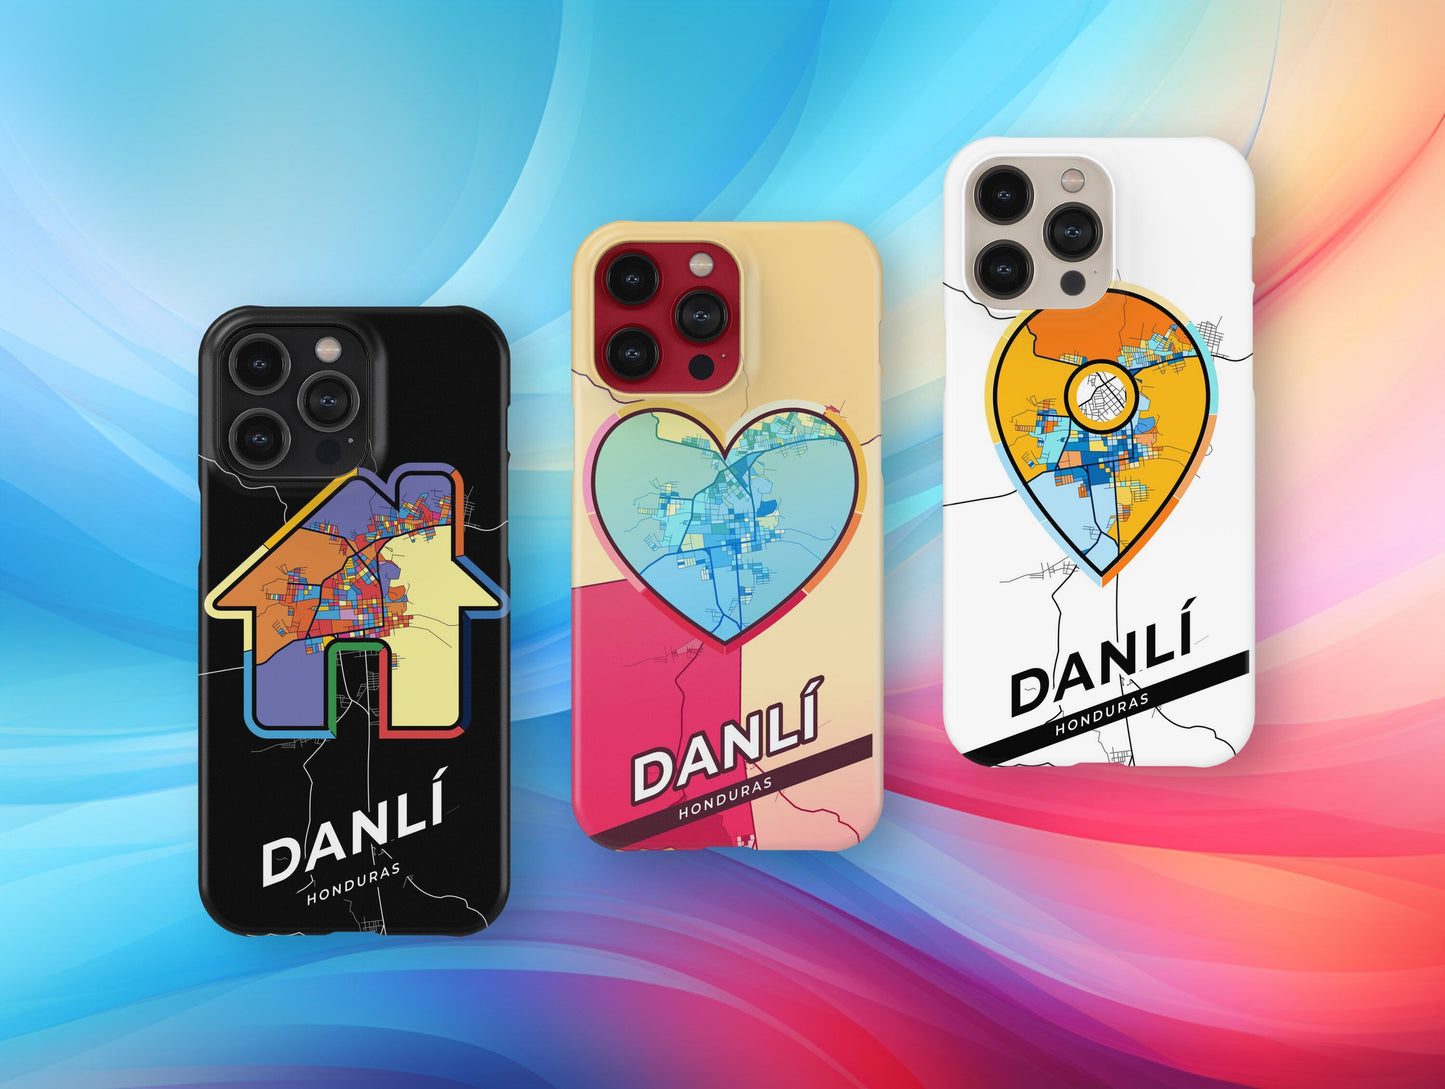 Danlí Honduras slim phone case with colorful icon. Birthday, wedding or housewarming gift. Couple match cases.